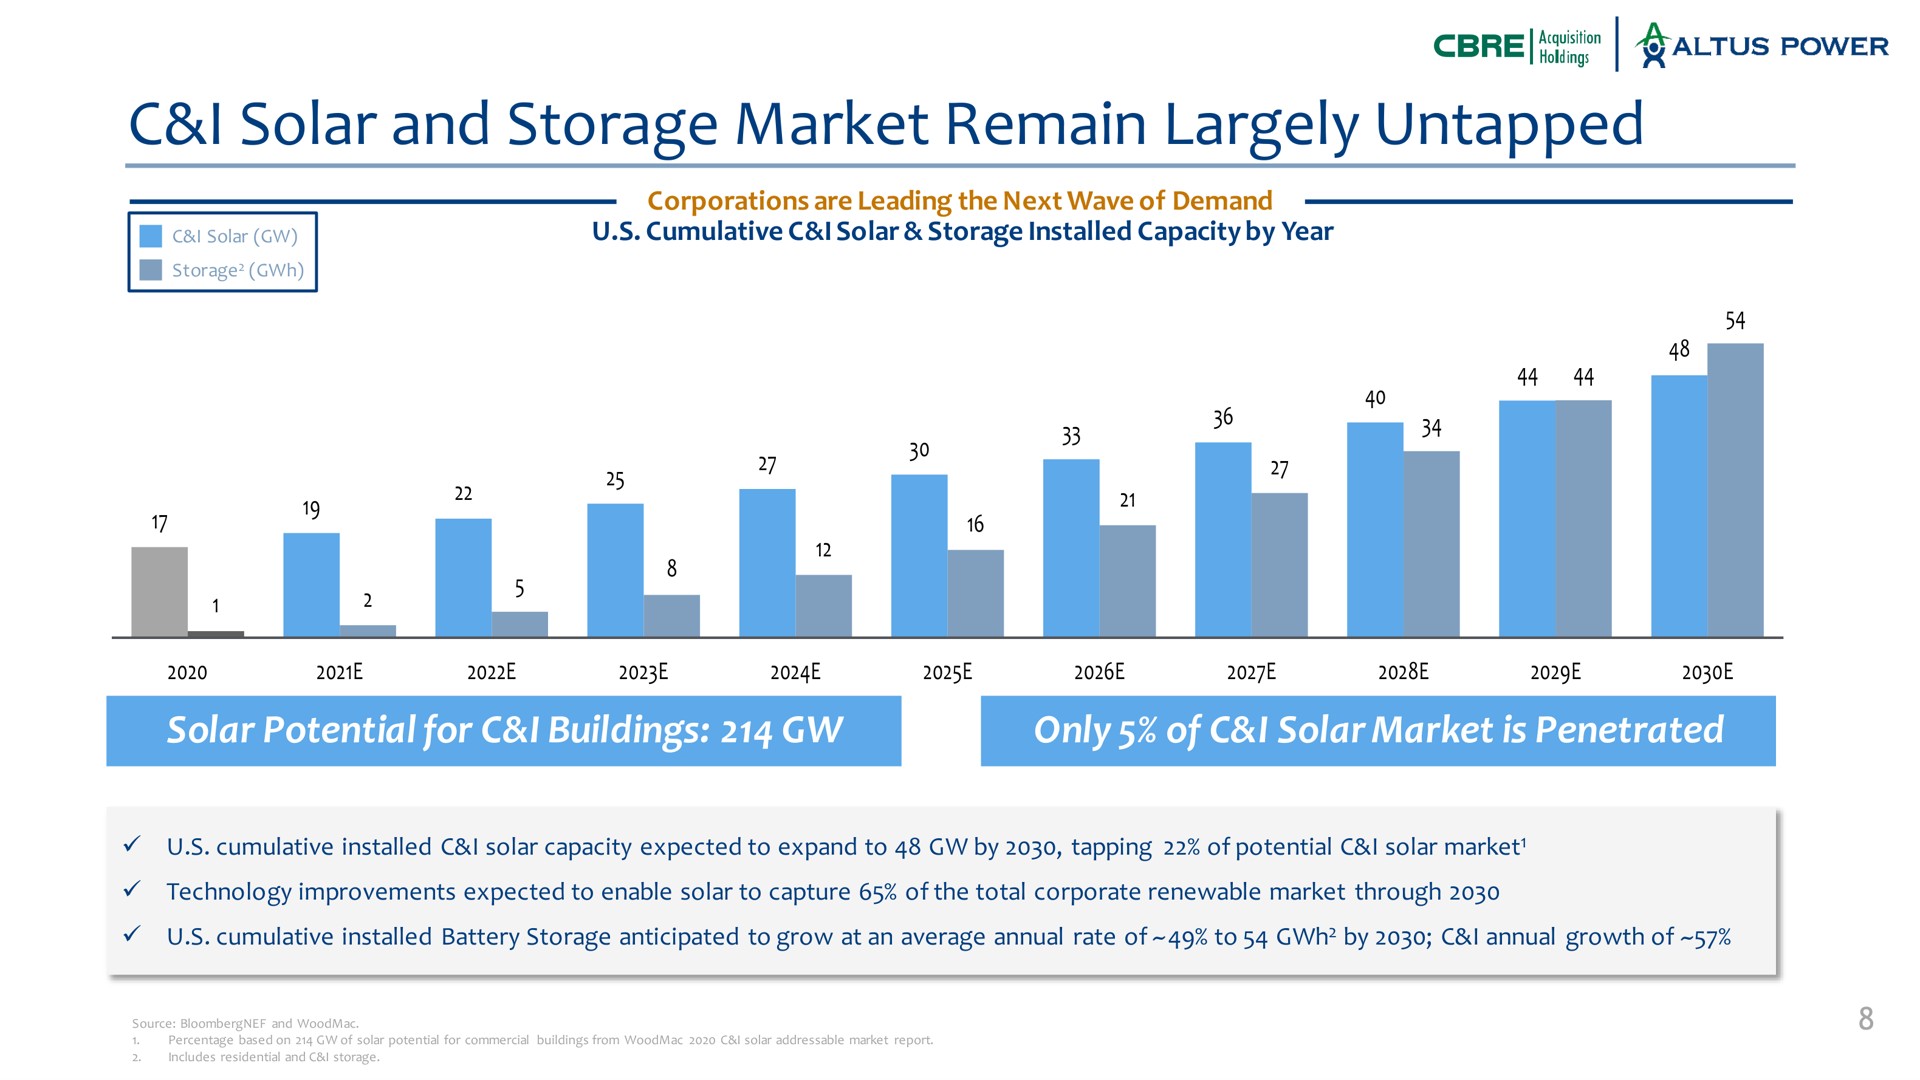 i solar and storage market remain largely untapped solar potential for i buildings only of i solar market is penetrated corporations are leading the next wave demand cumulative capacity by year power | Altus Power